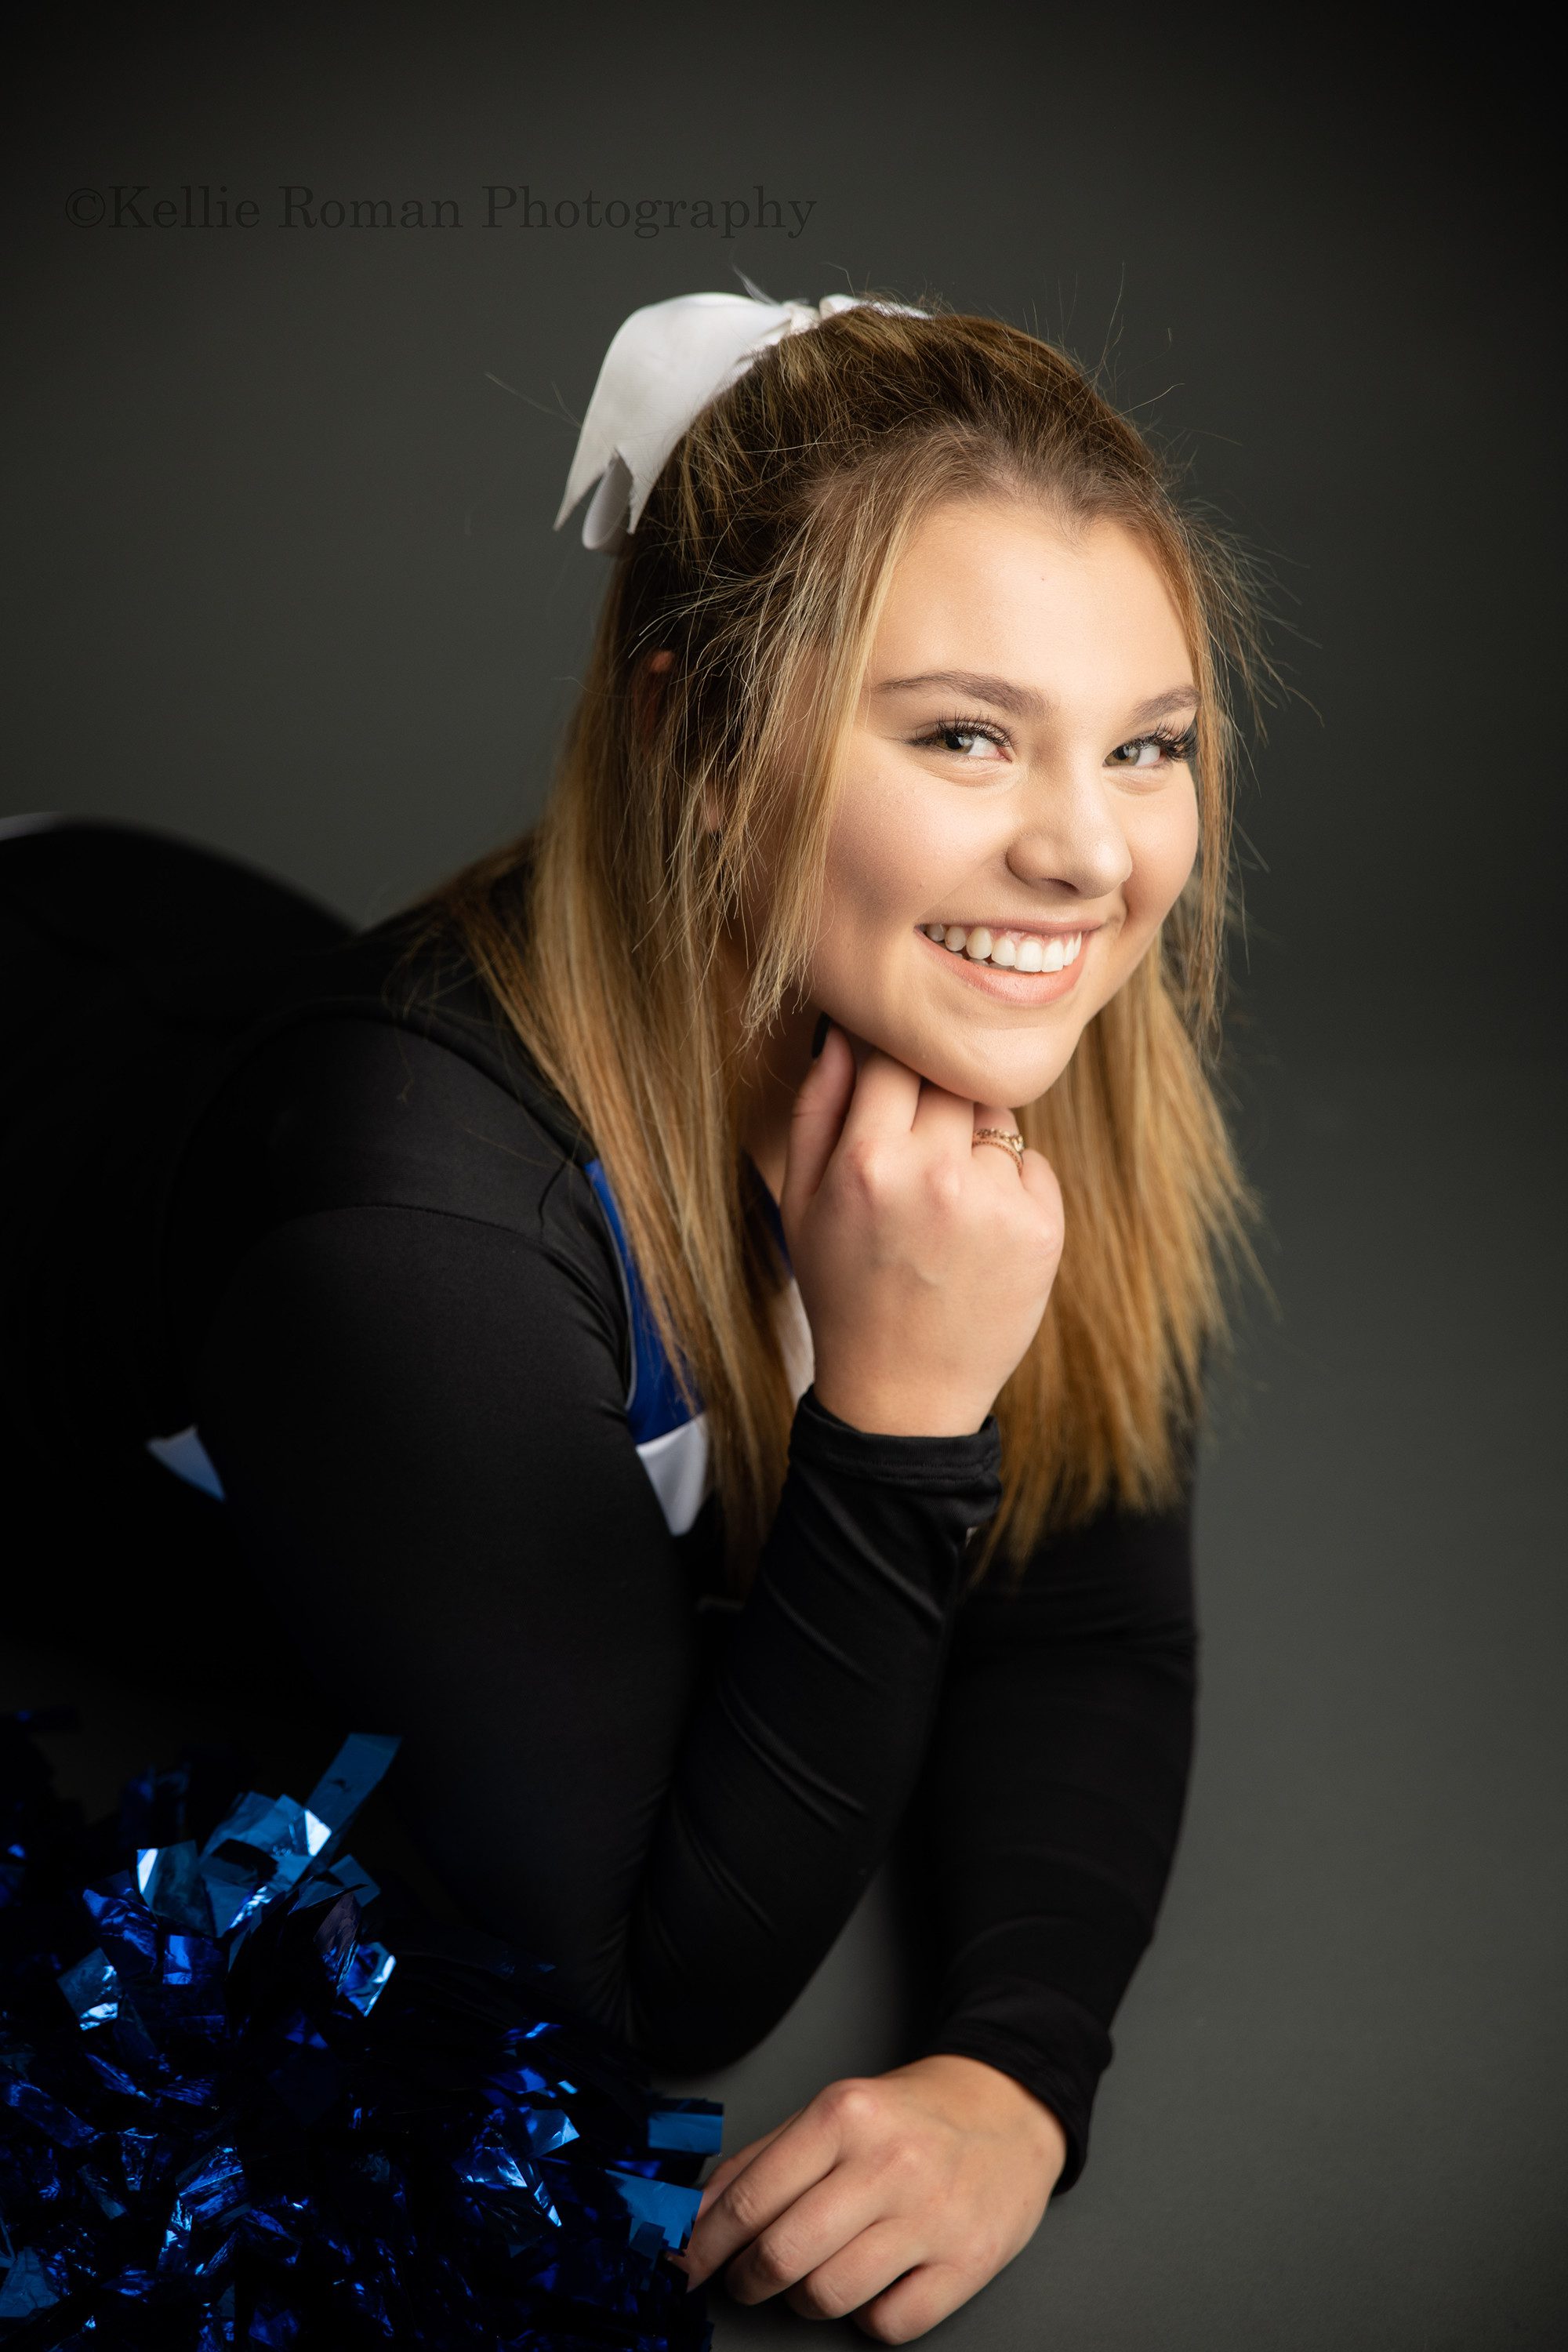 high school senior photographer a high school girl is in milwaukee photographers studio. The girl is laying on her stomach onto of a grey backdrop. She's wearing her blue and black cheer uniform and has her blue pom poms resting next to her. Her hand is under her chin.